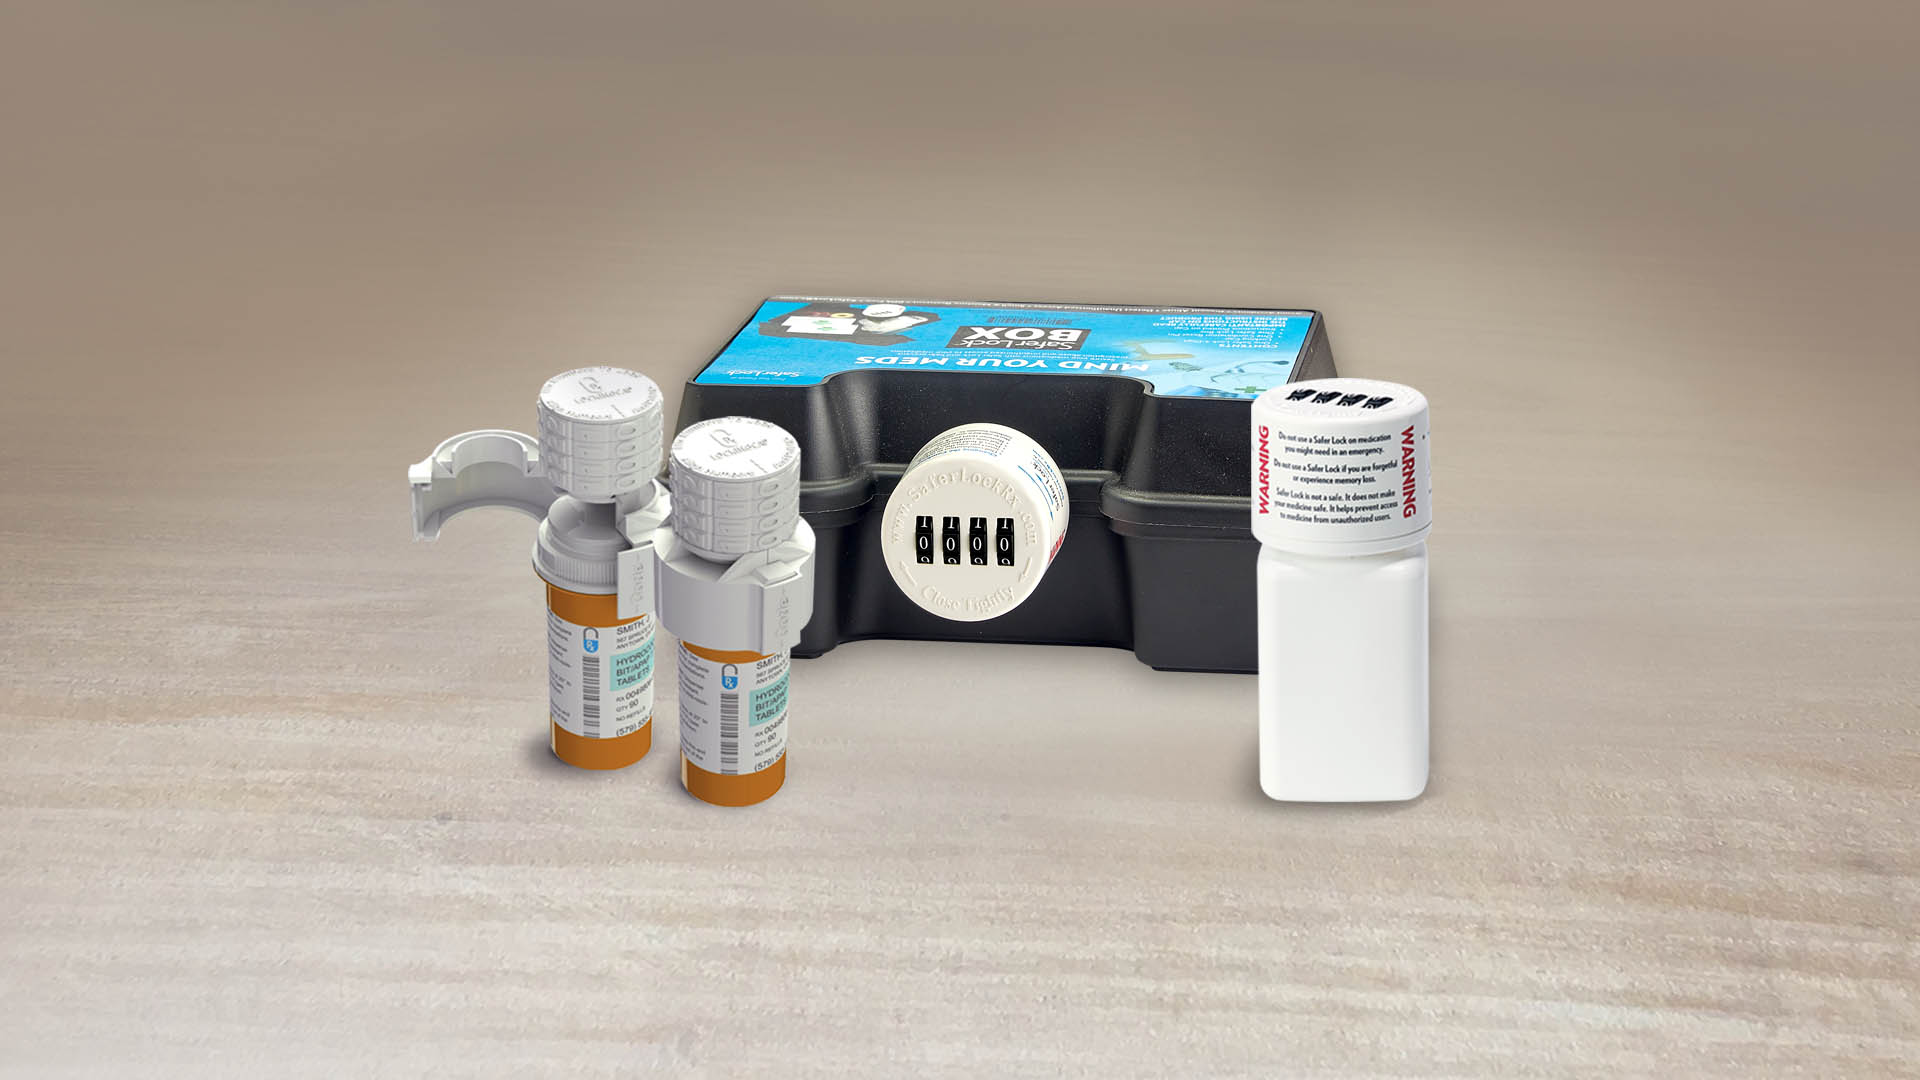 A collection of Rx Guardian products. Two Rx Locking Caps on orange pill bottles, a black Safer Lock box with a white cap, and a white Safer Lock bottle with locking cap.